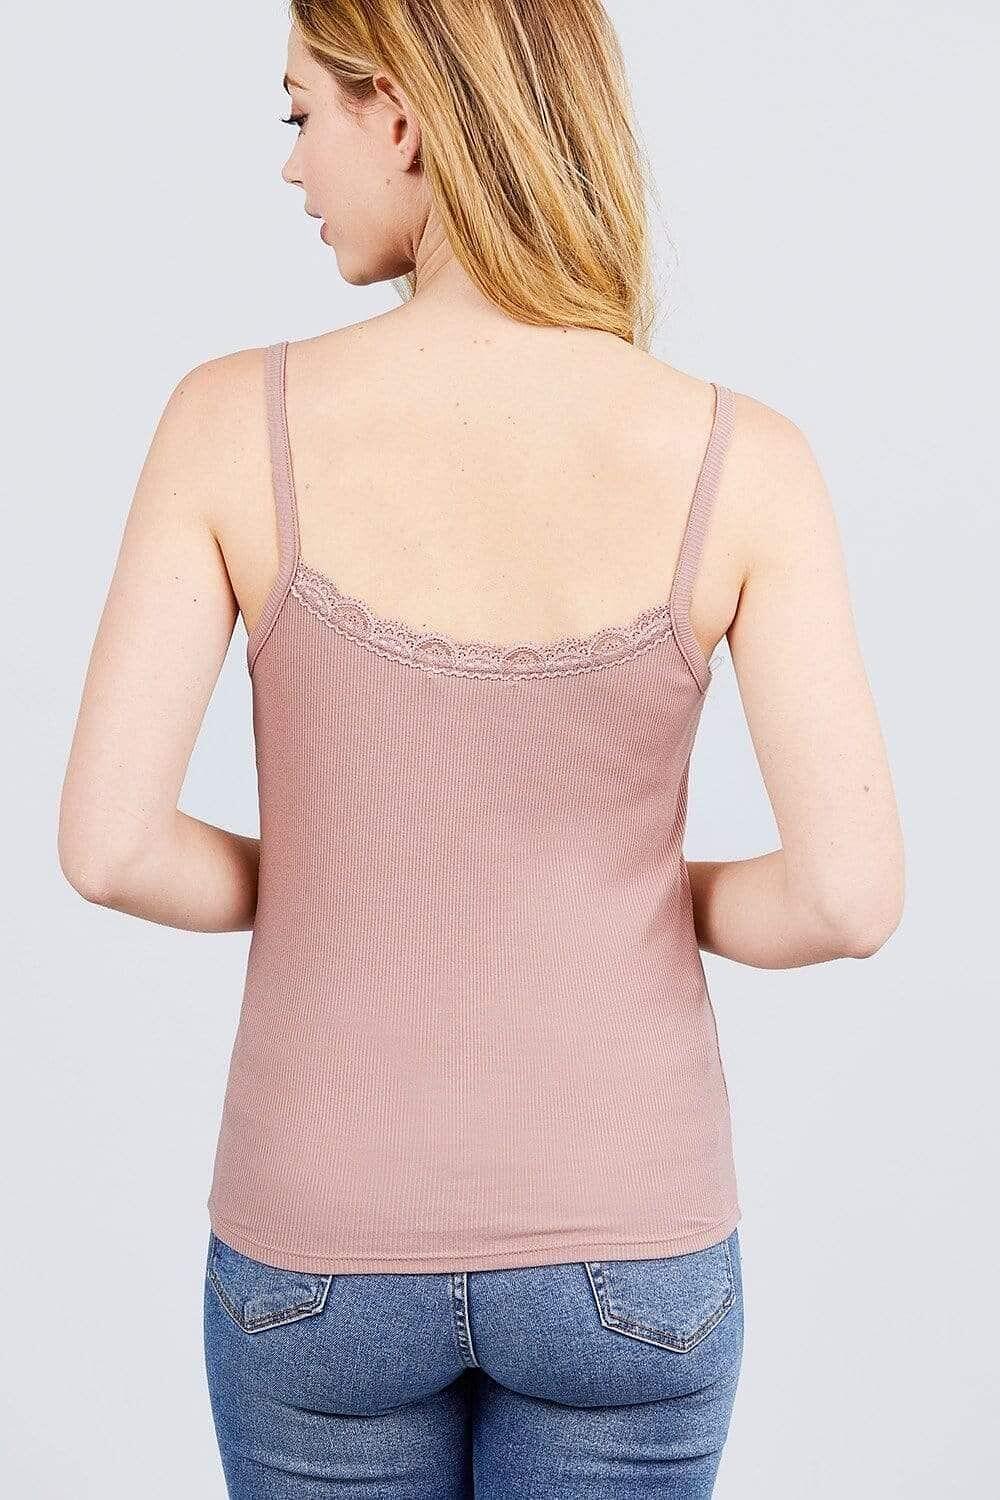 Beige Spaghetti Strap Cami Top - Shopping Therapy Tank Tops & Camis